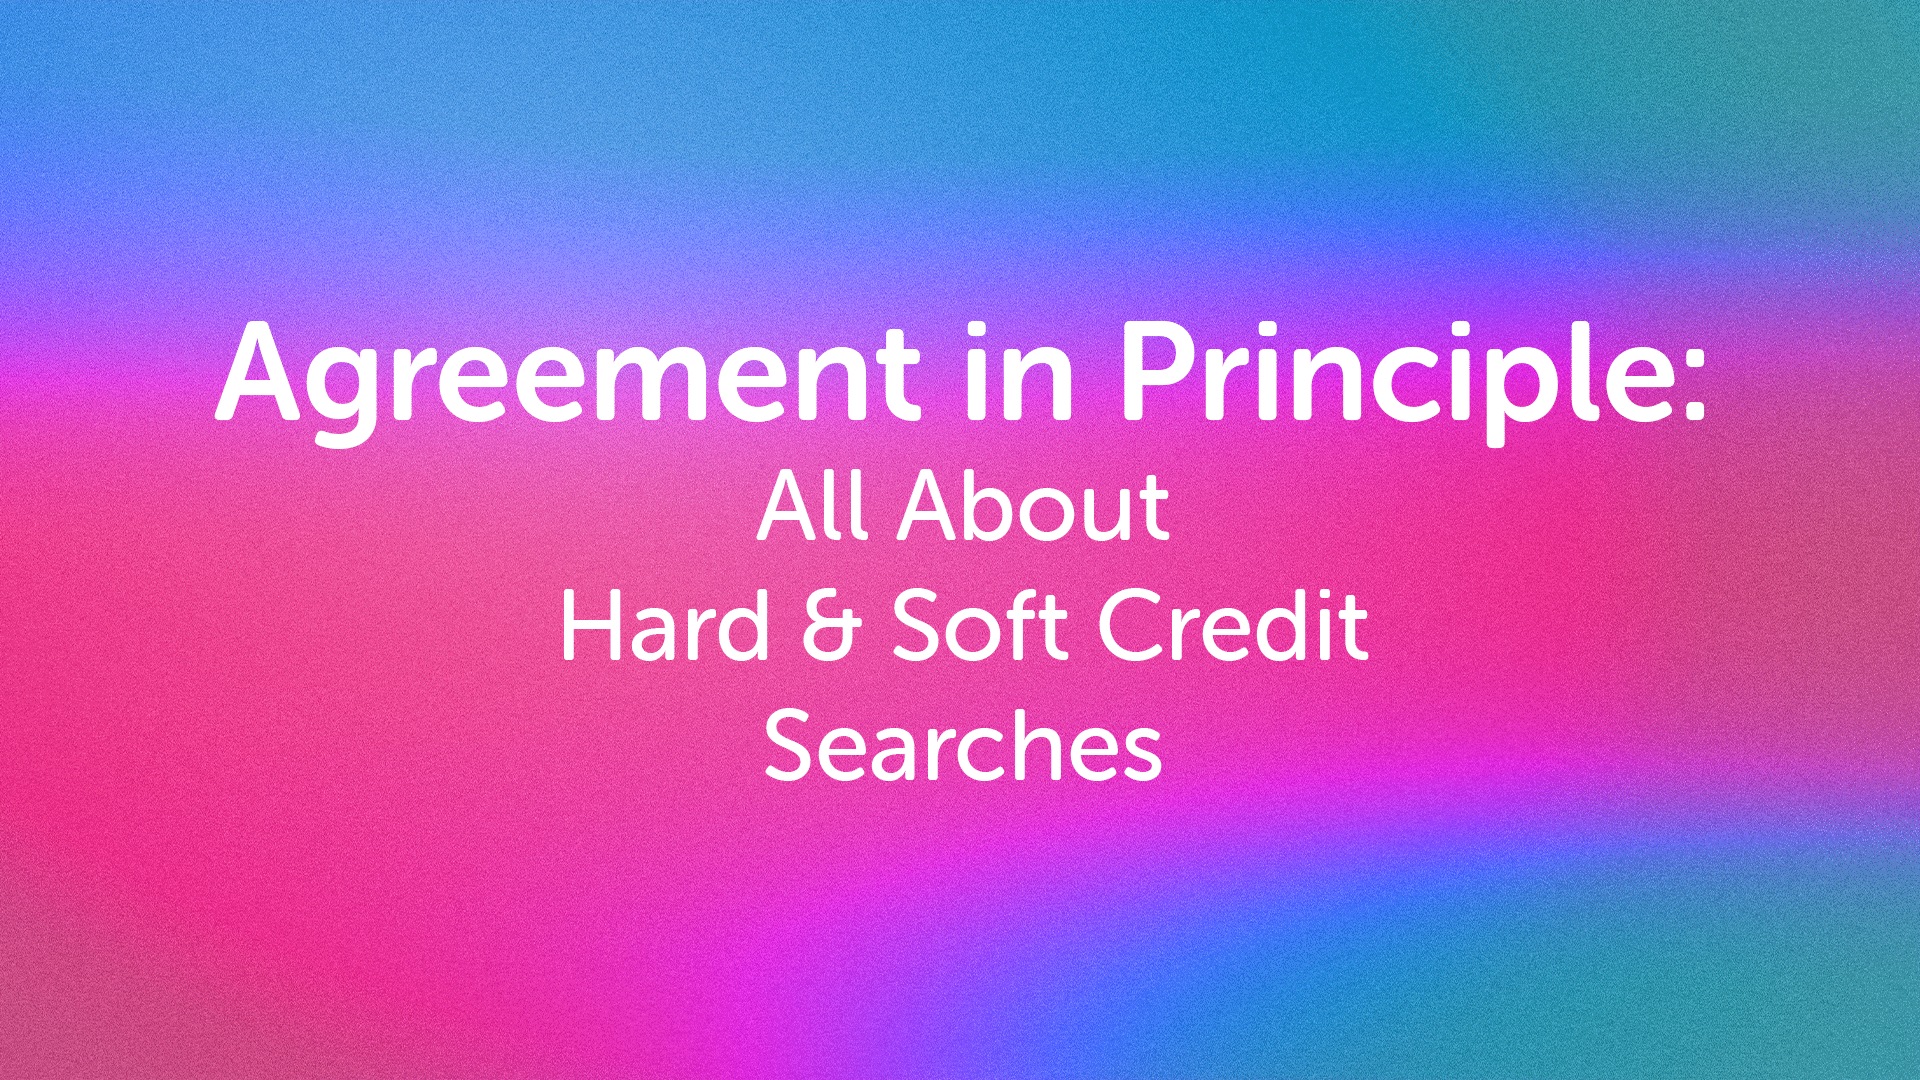 Agreement in Principle & Soft Credit Searches